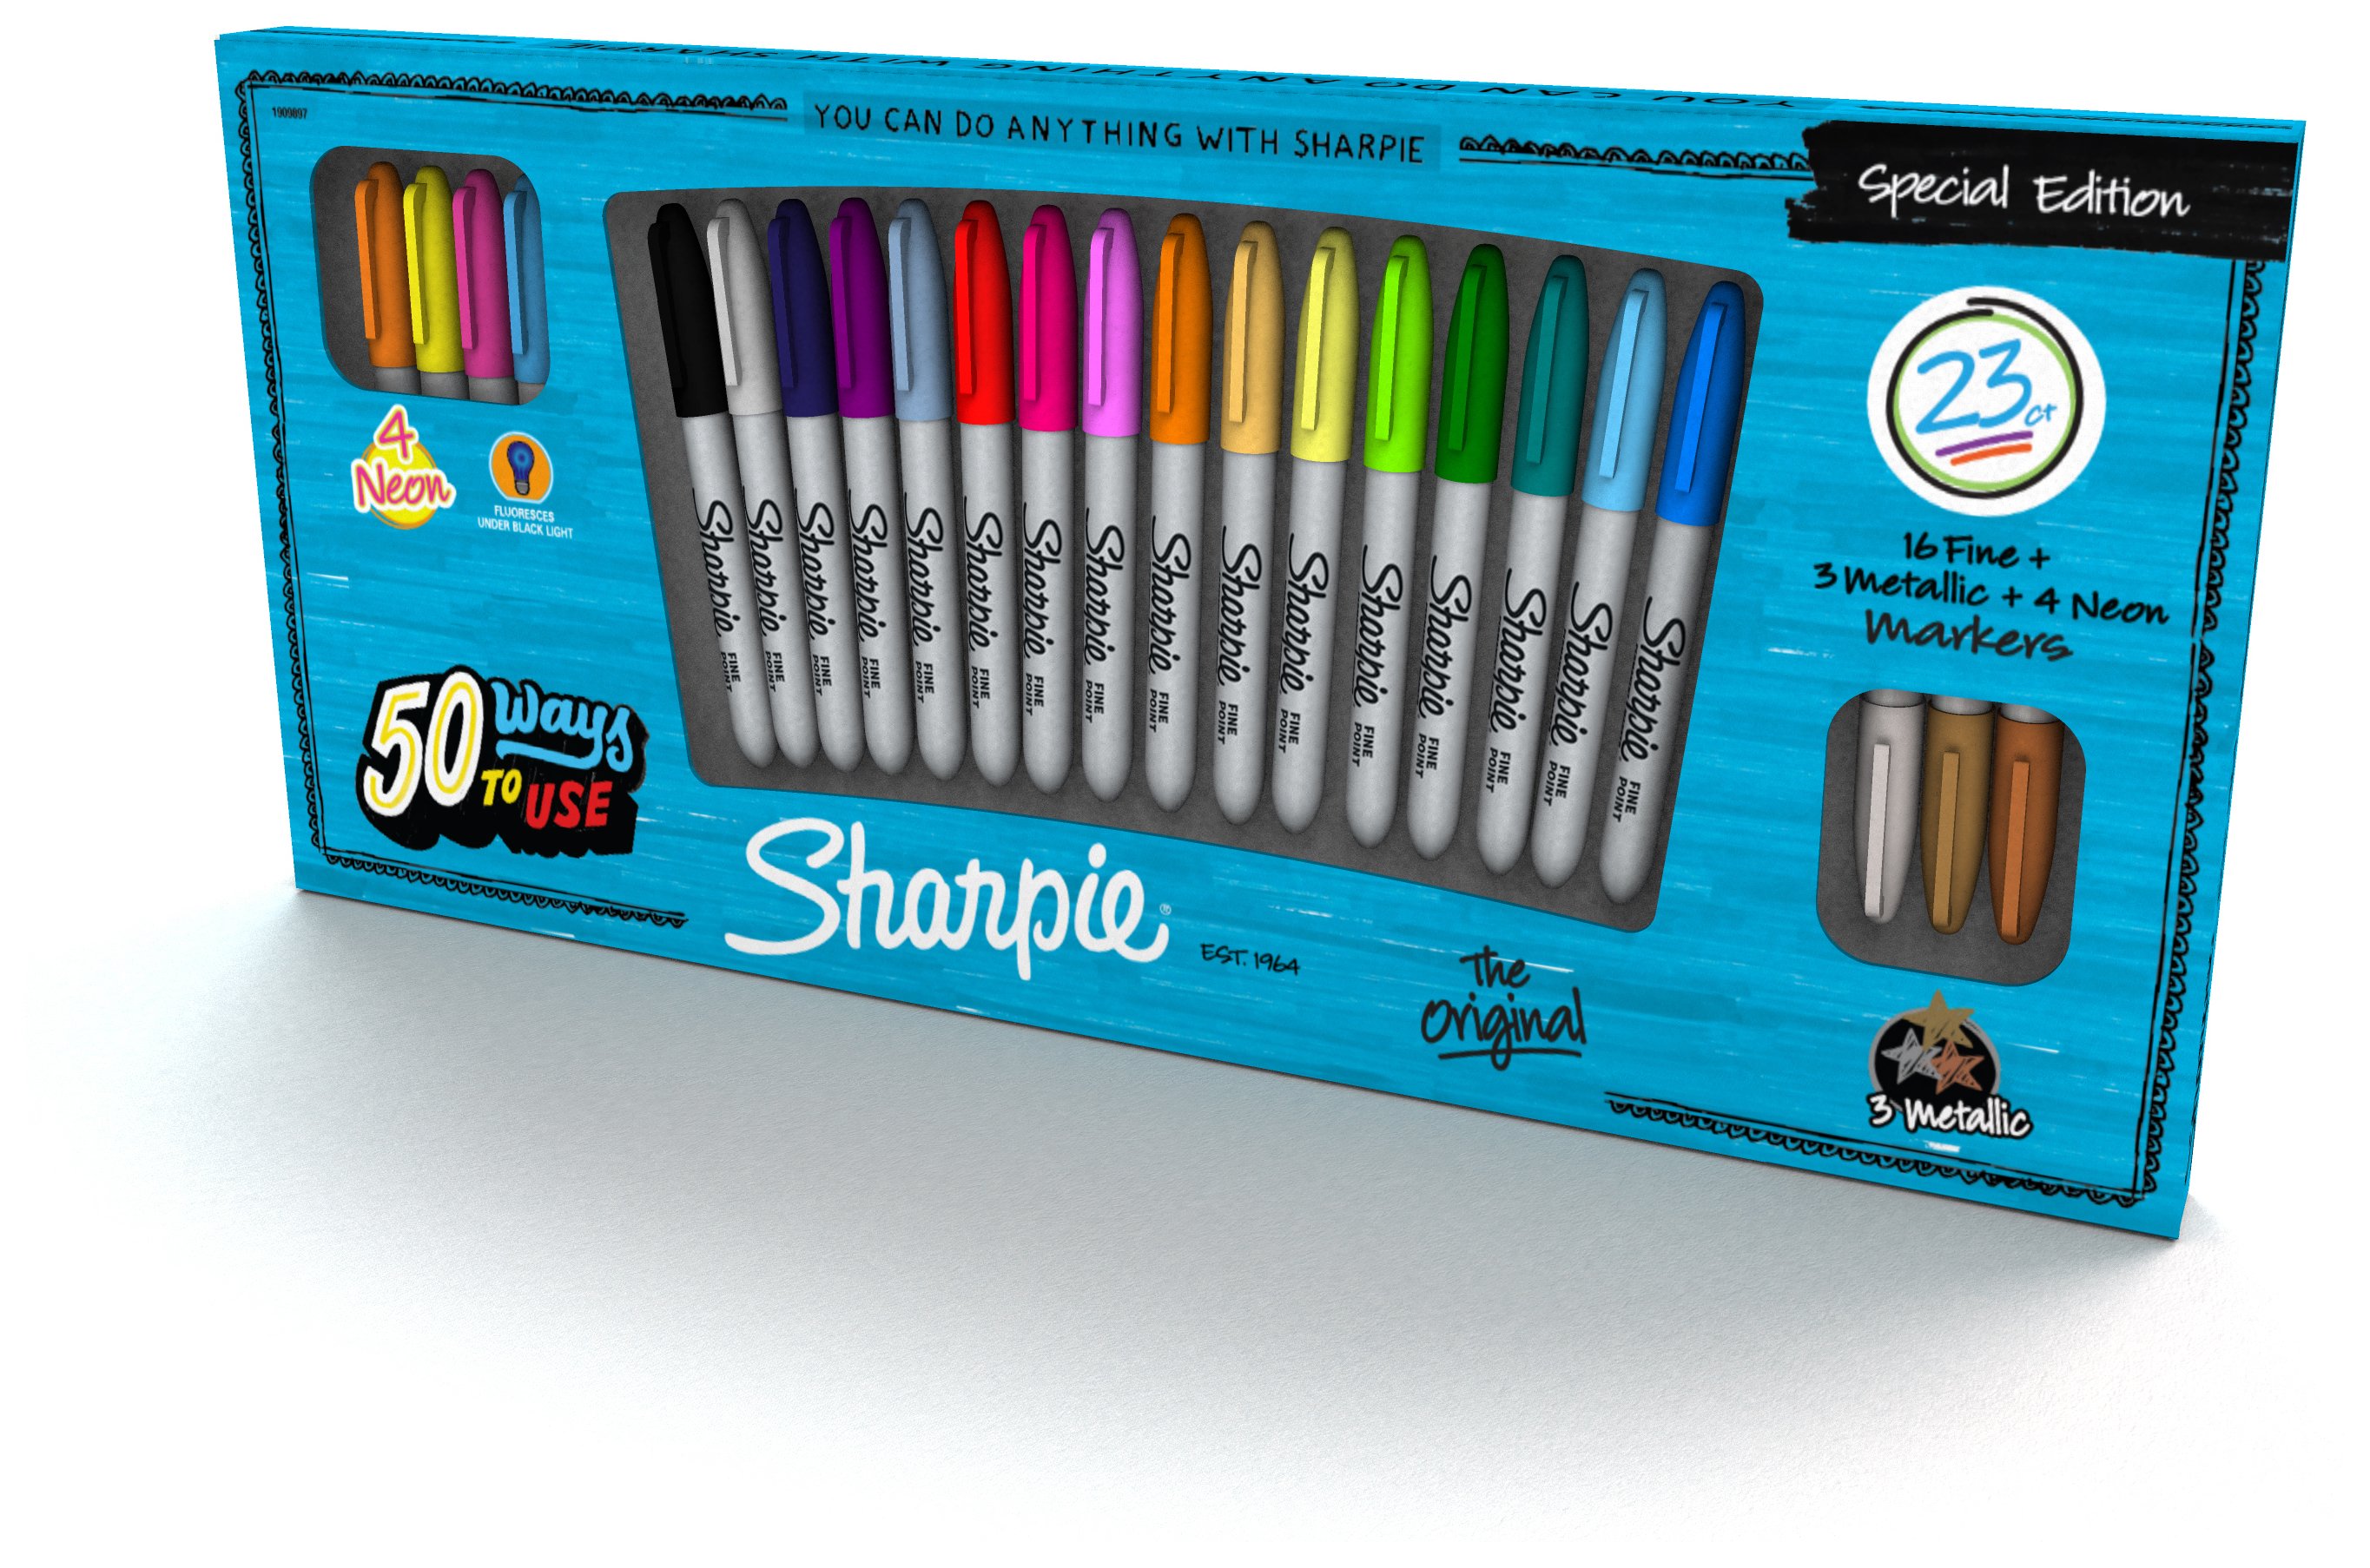 Sharpie 23 Pack of Fine Permanent Markers.